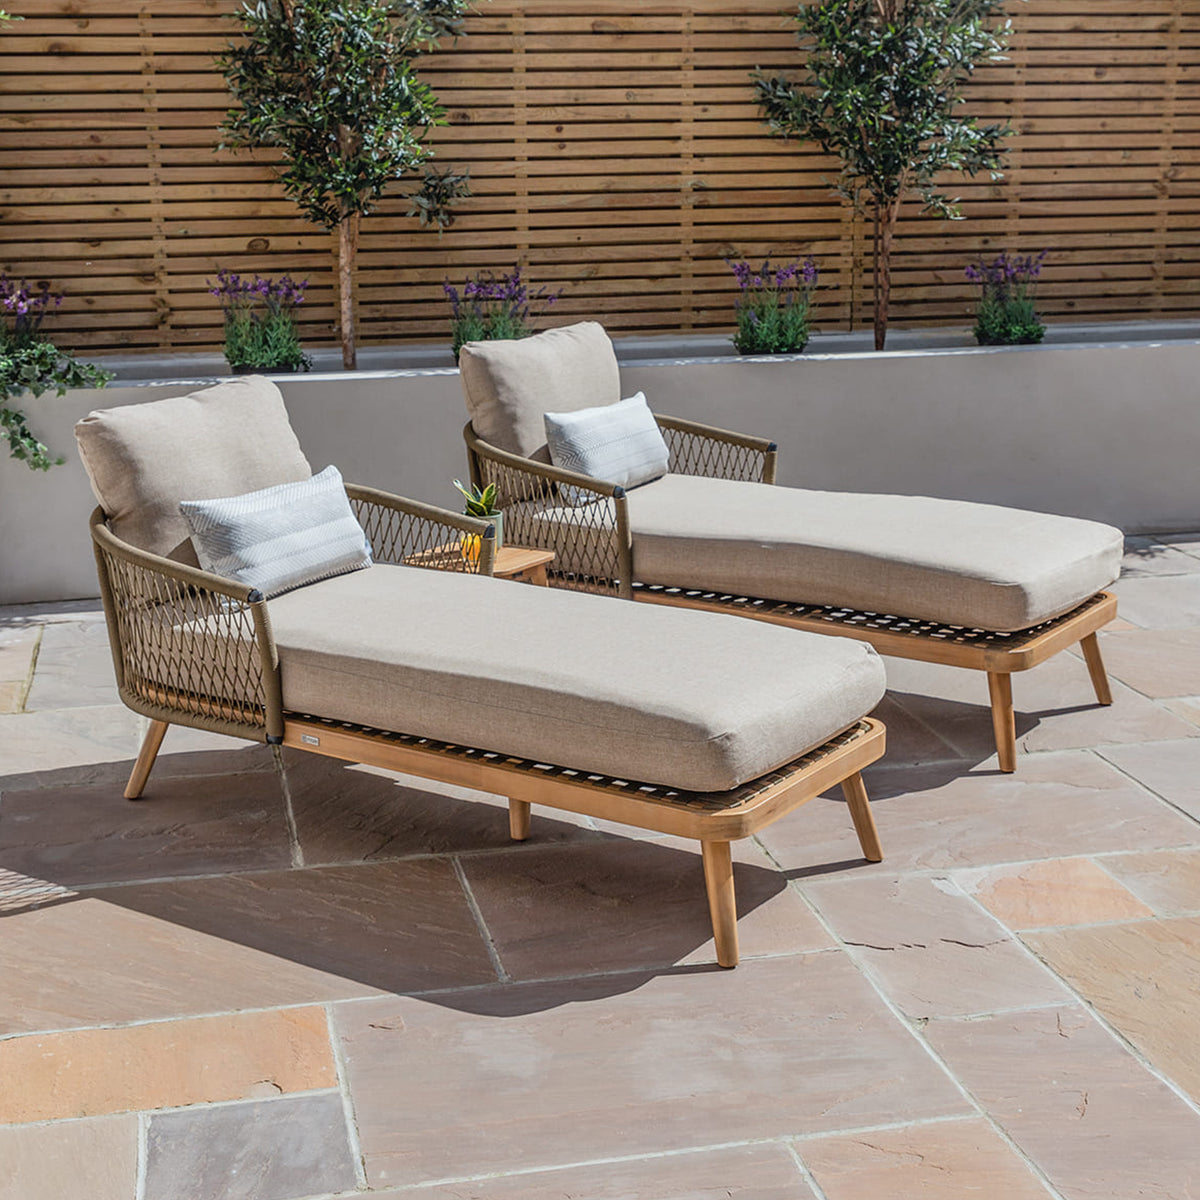 Bali Double Sunlounger Set & Side Table